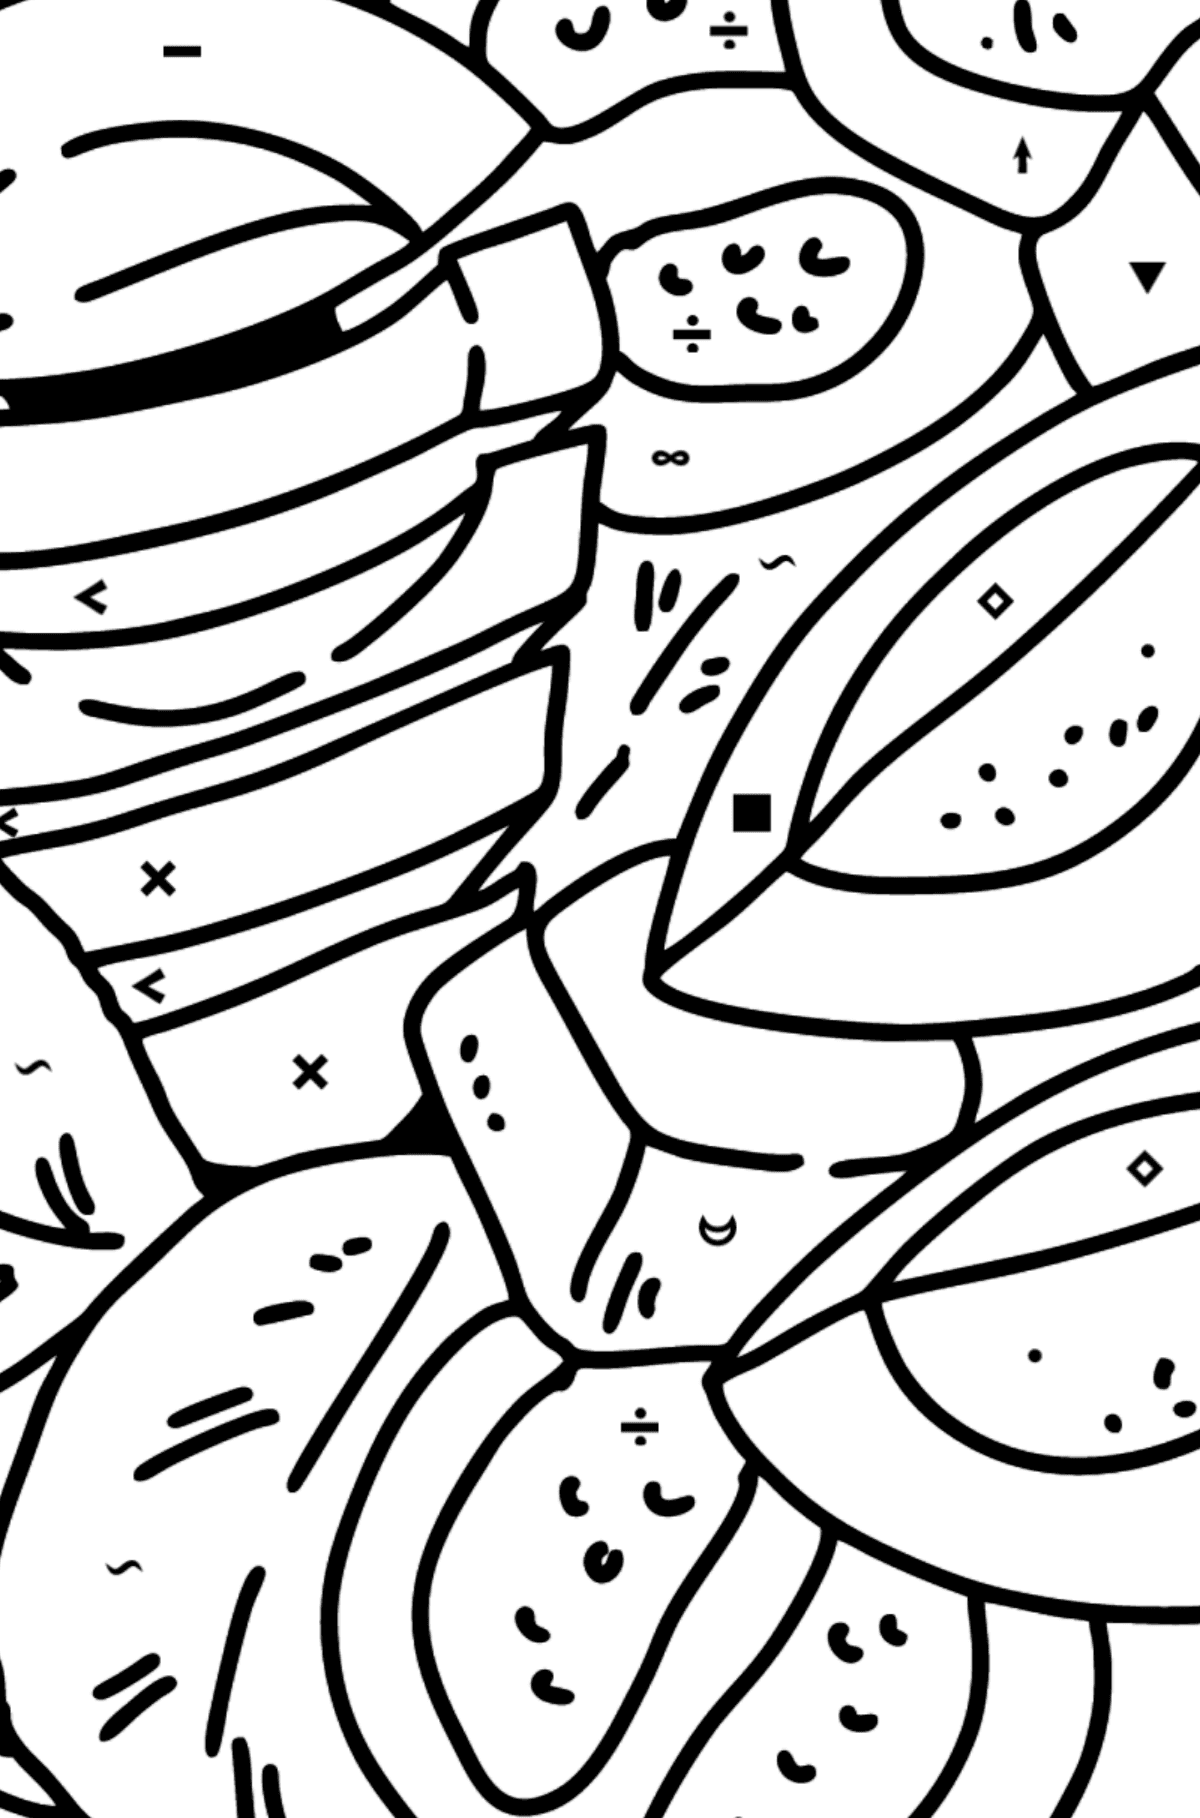 Avocado Salad coloring page - Coloring by Symbols for Kids